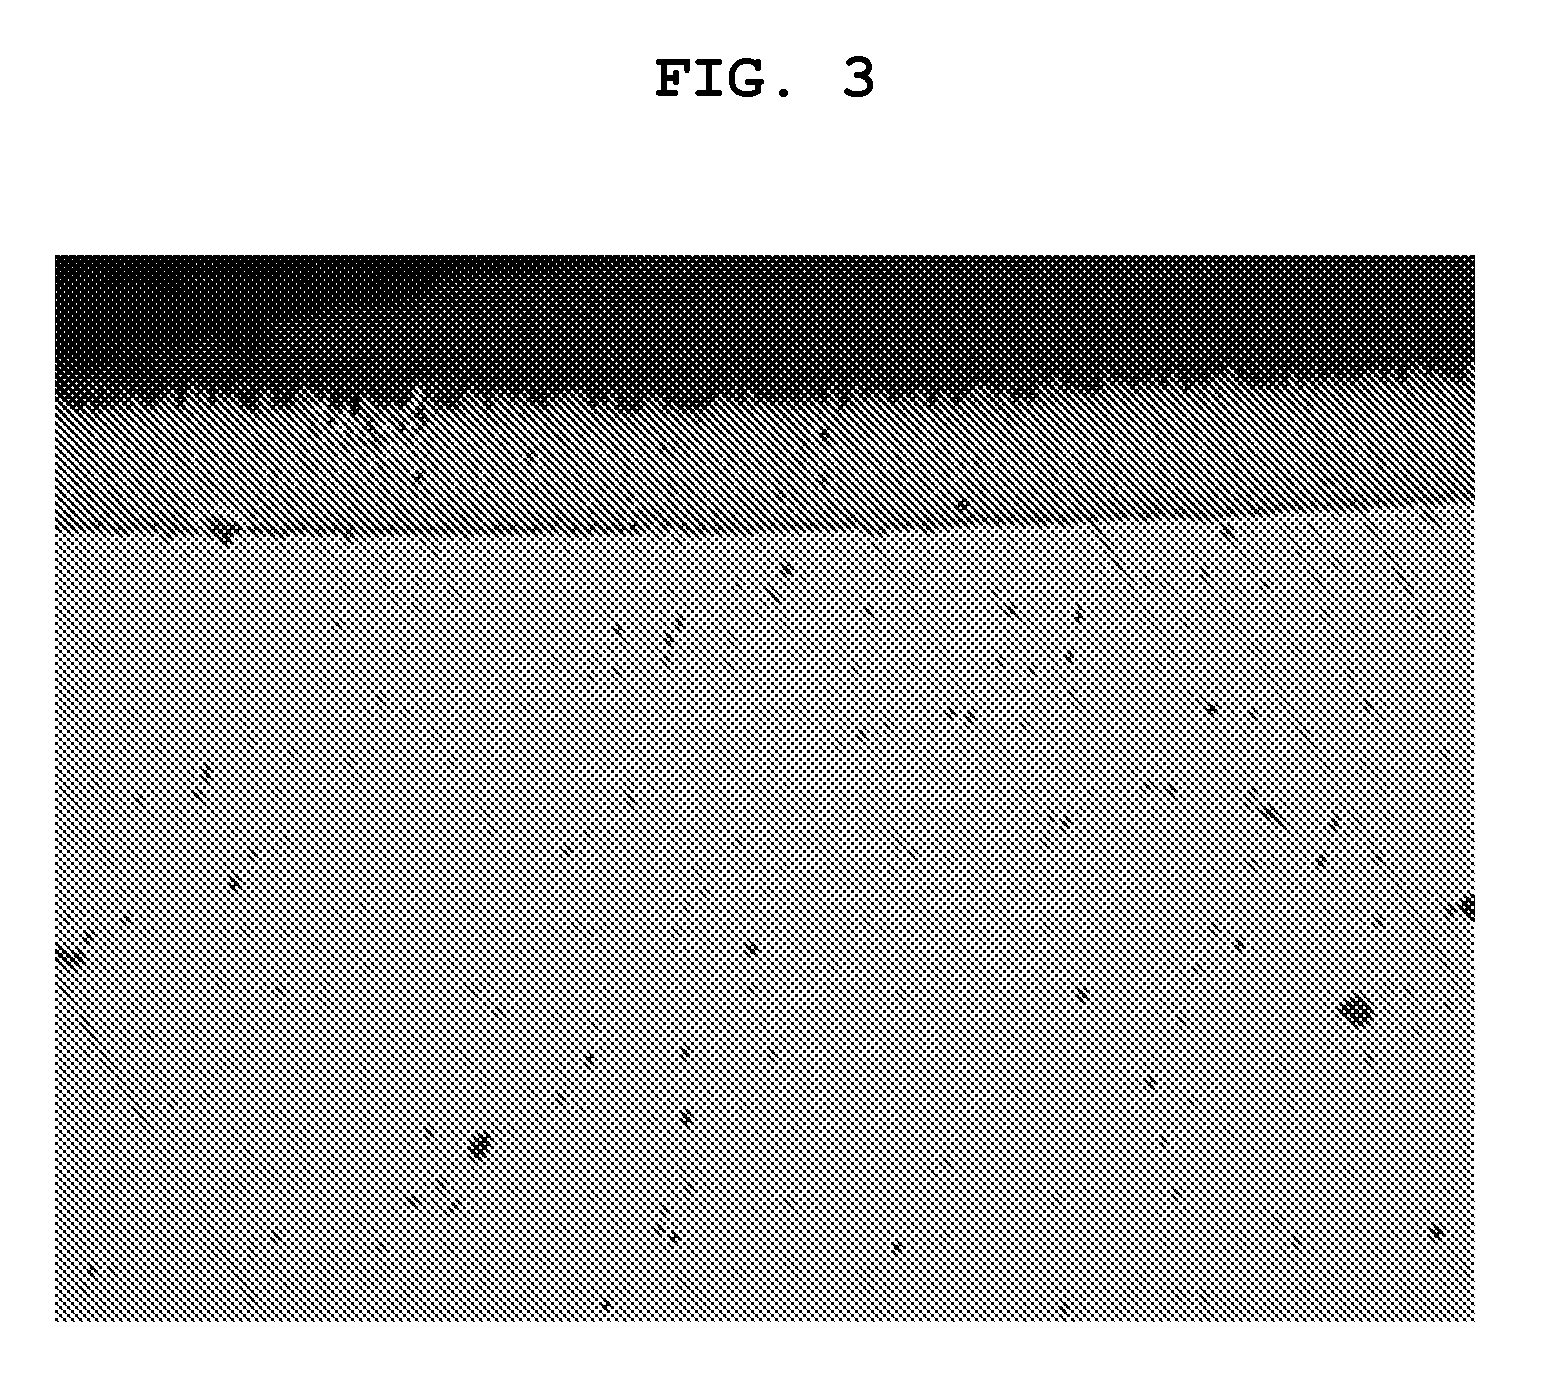 Method of preventing corrosion degradation using ni or ni-alloy plating